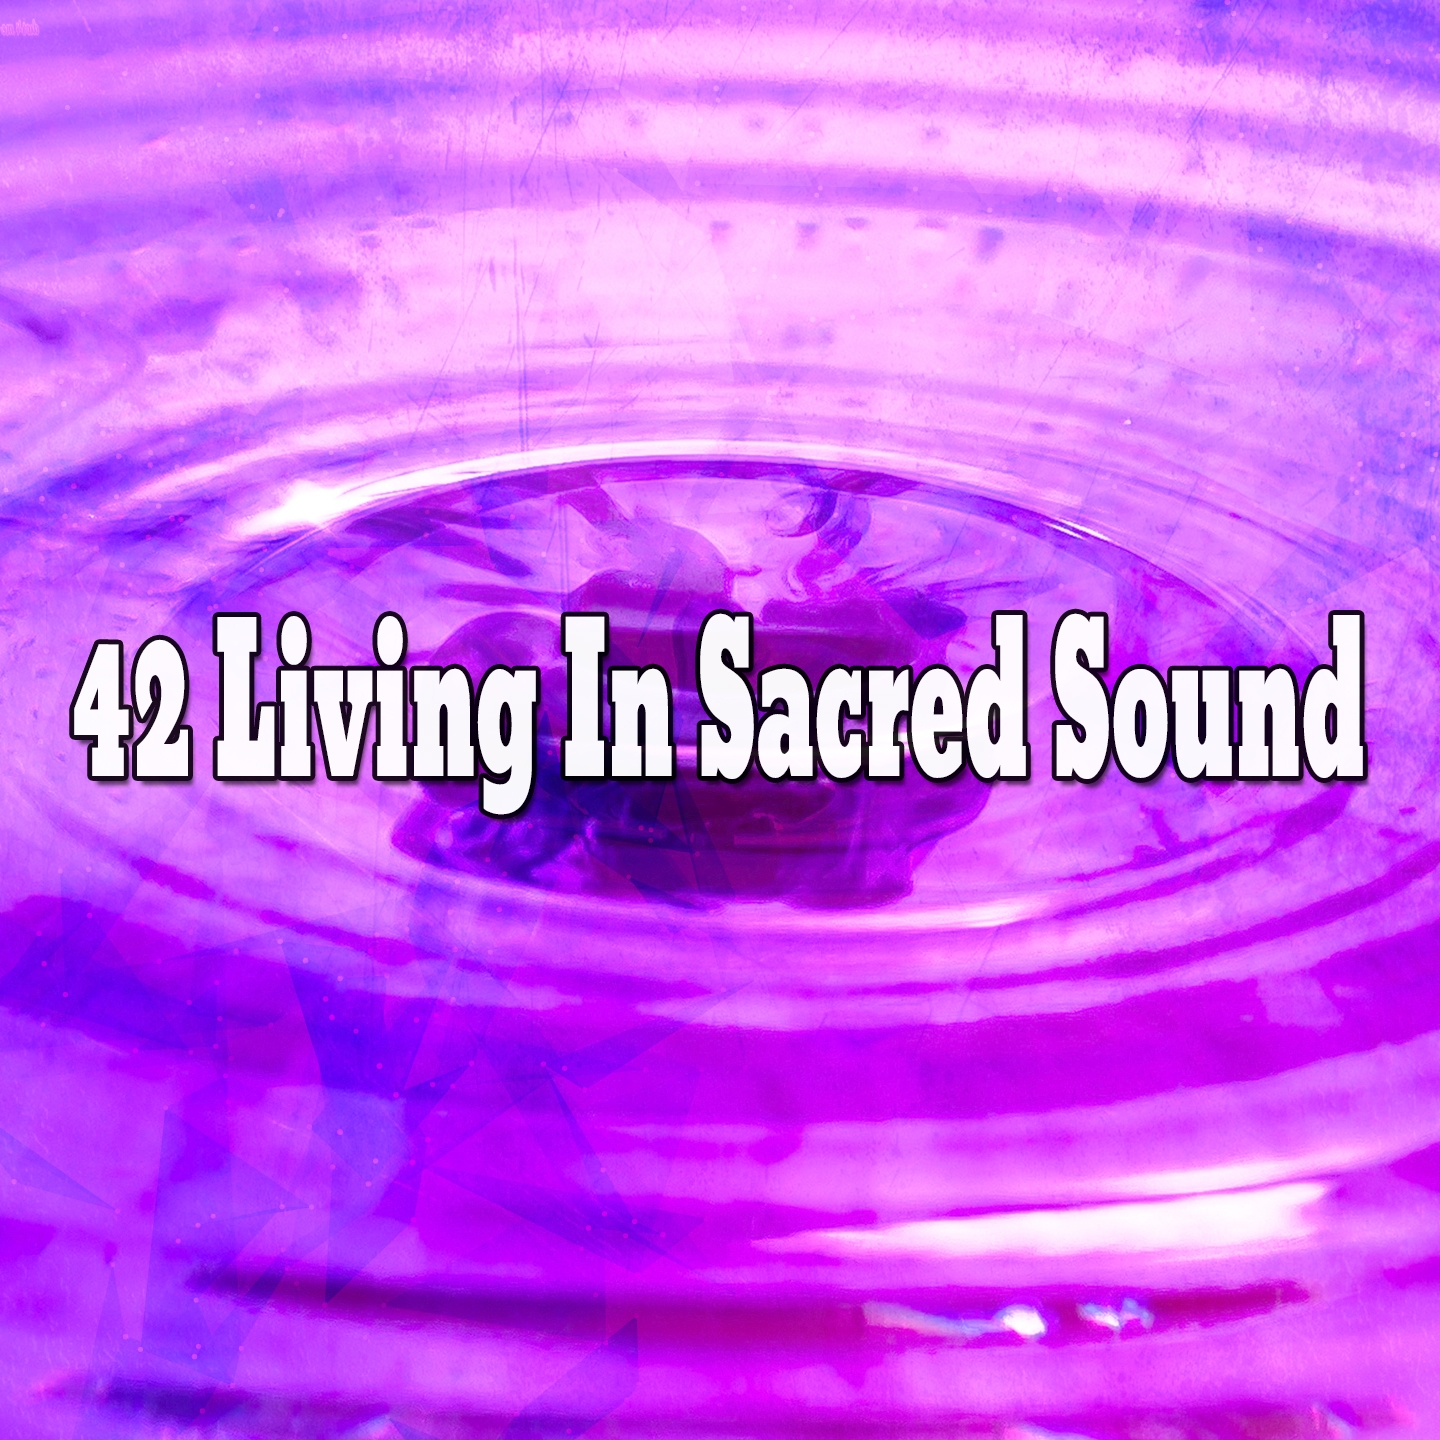 42 Living In Sacred Sound